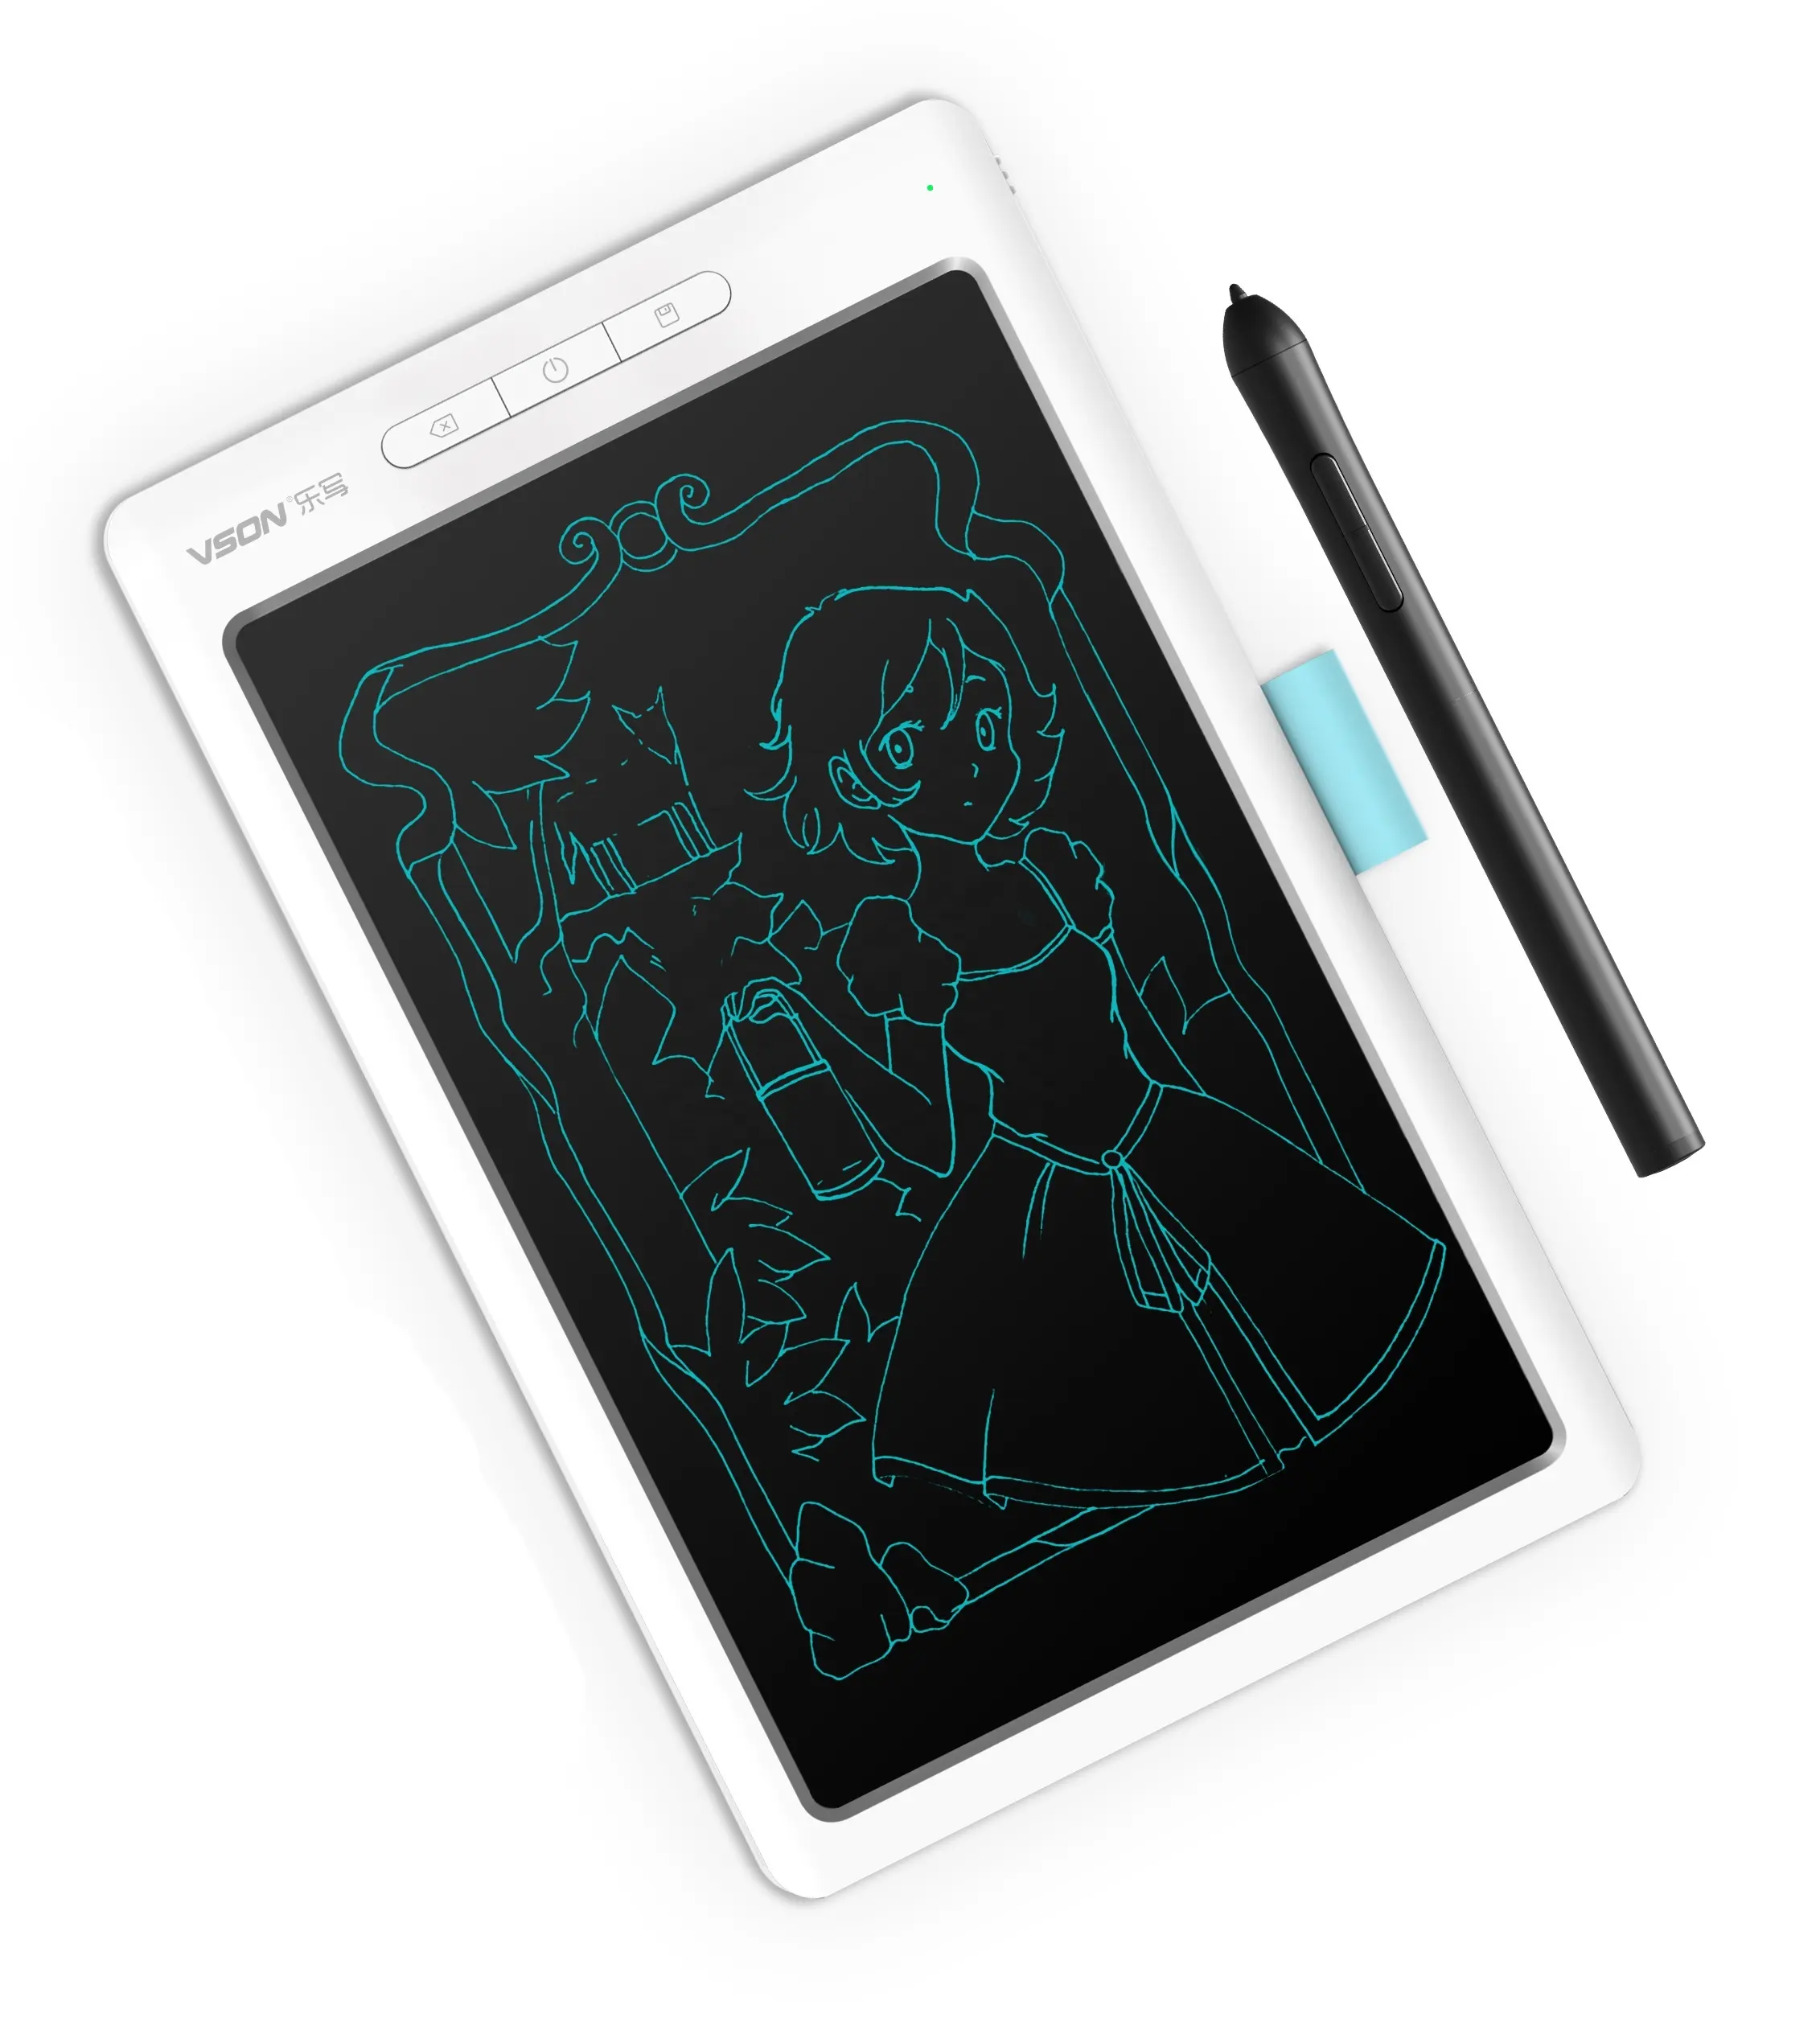 WP9612 Low Price 10 inch LCD tablet writing Portable Drawing Monitor with online class functions for kids